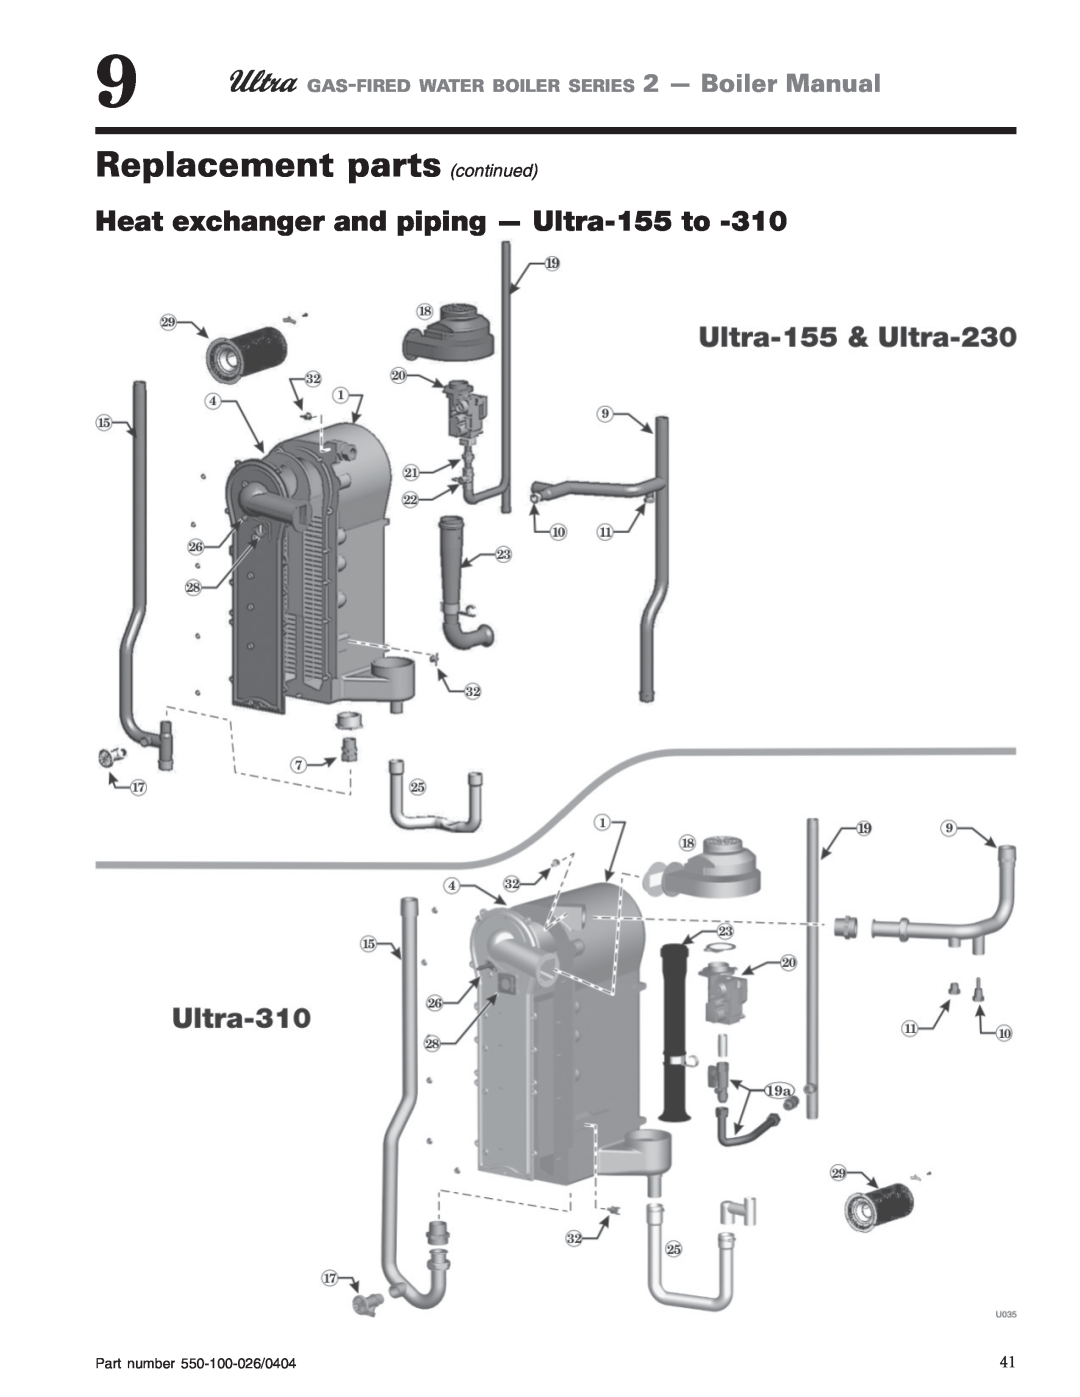 Ultra electronic 80, 105, 230 & -310 manual Replacement parts continued, Heat exchanger and piping - Ultra-155to 